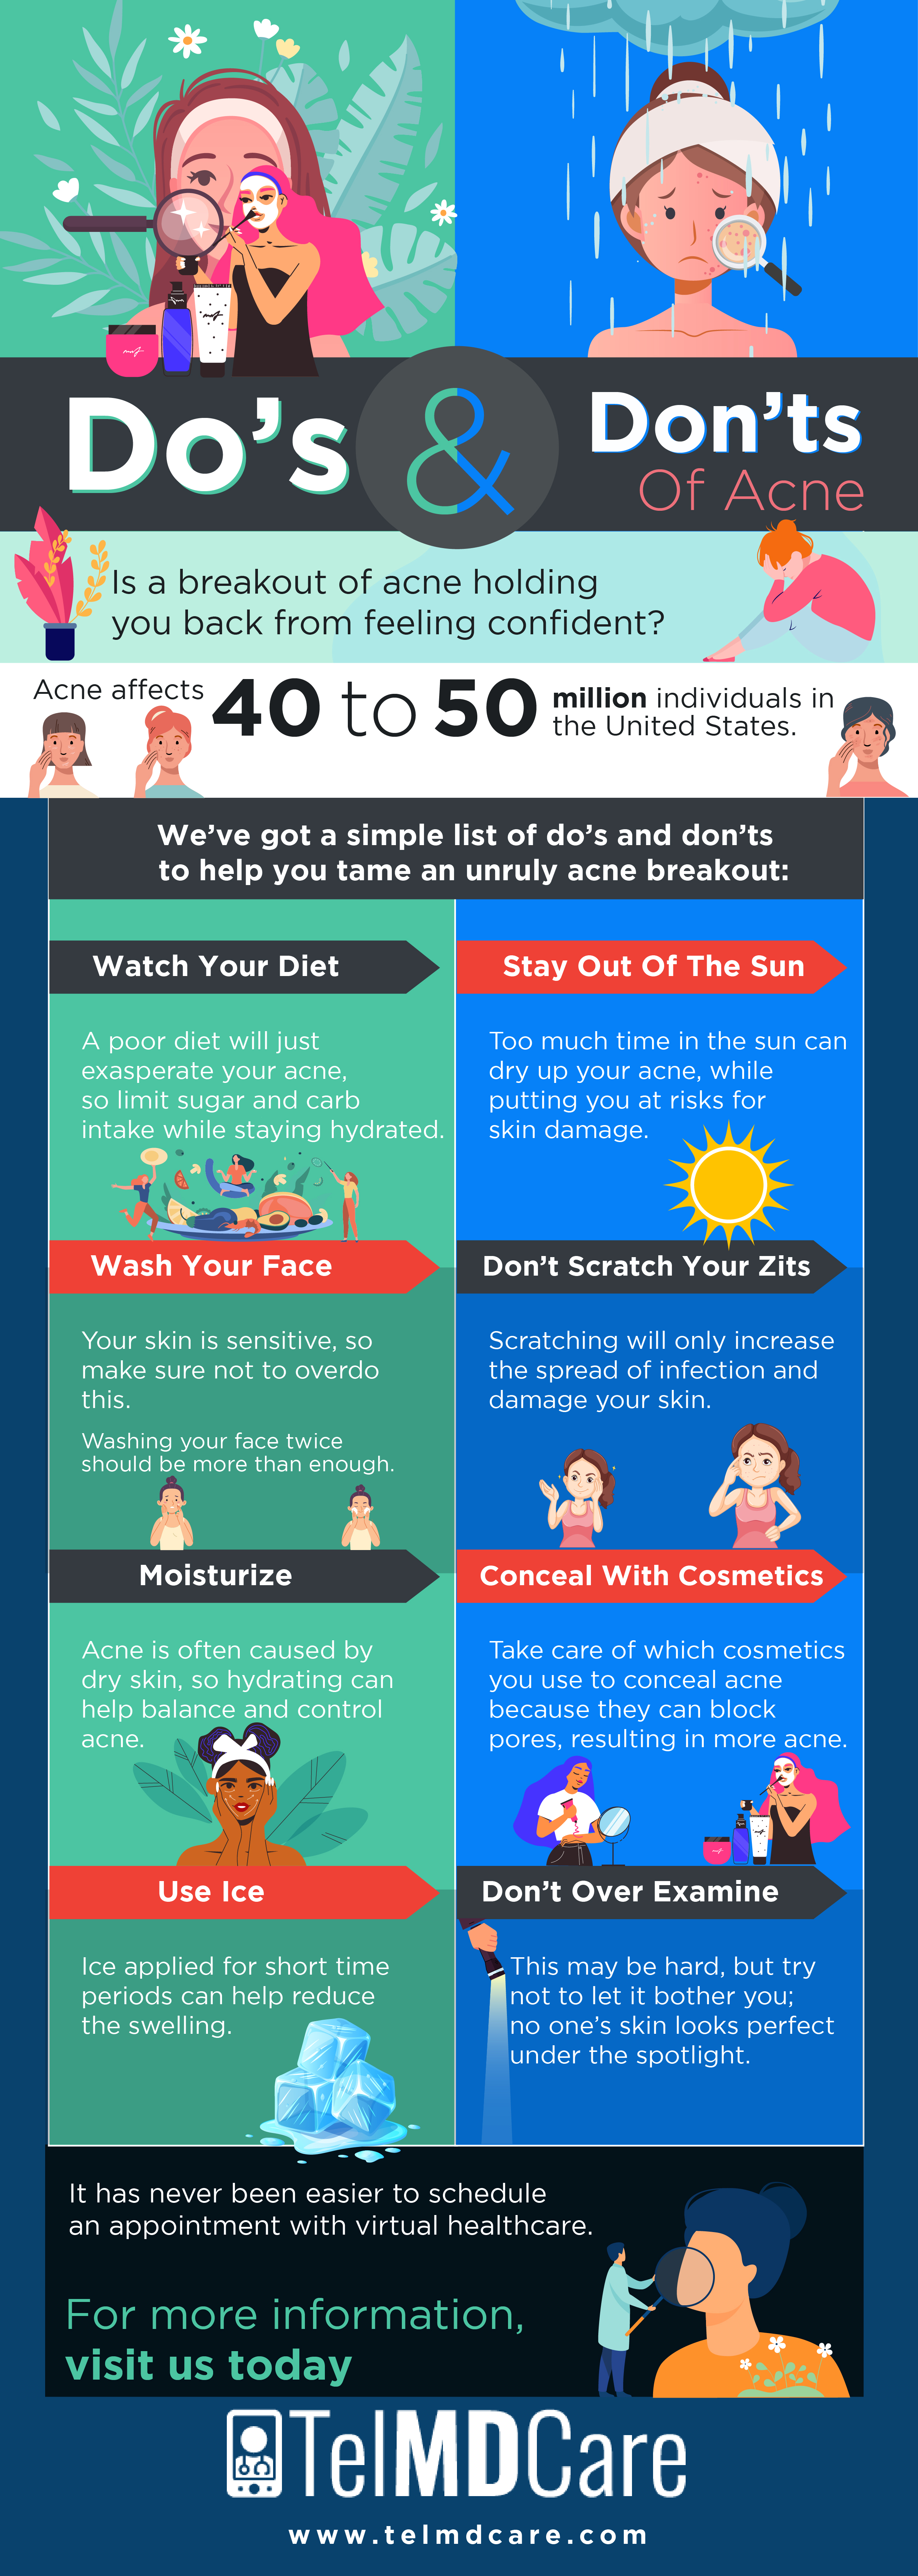 Do's & Don'ts of Acne